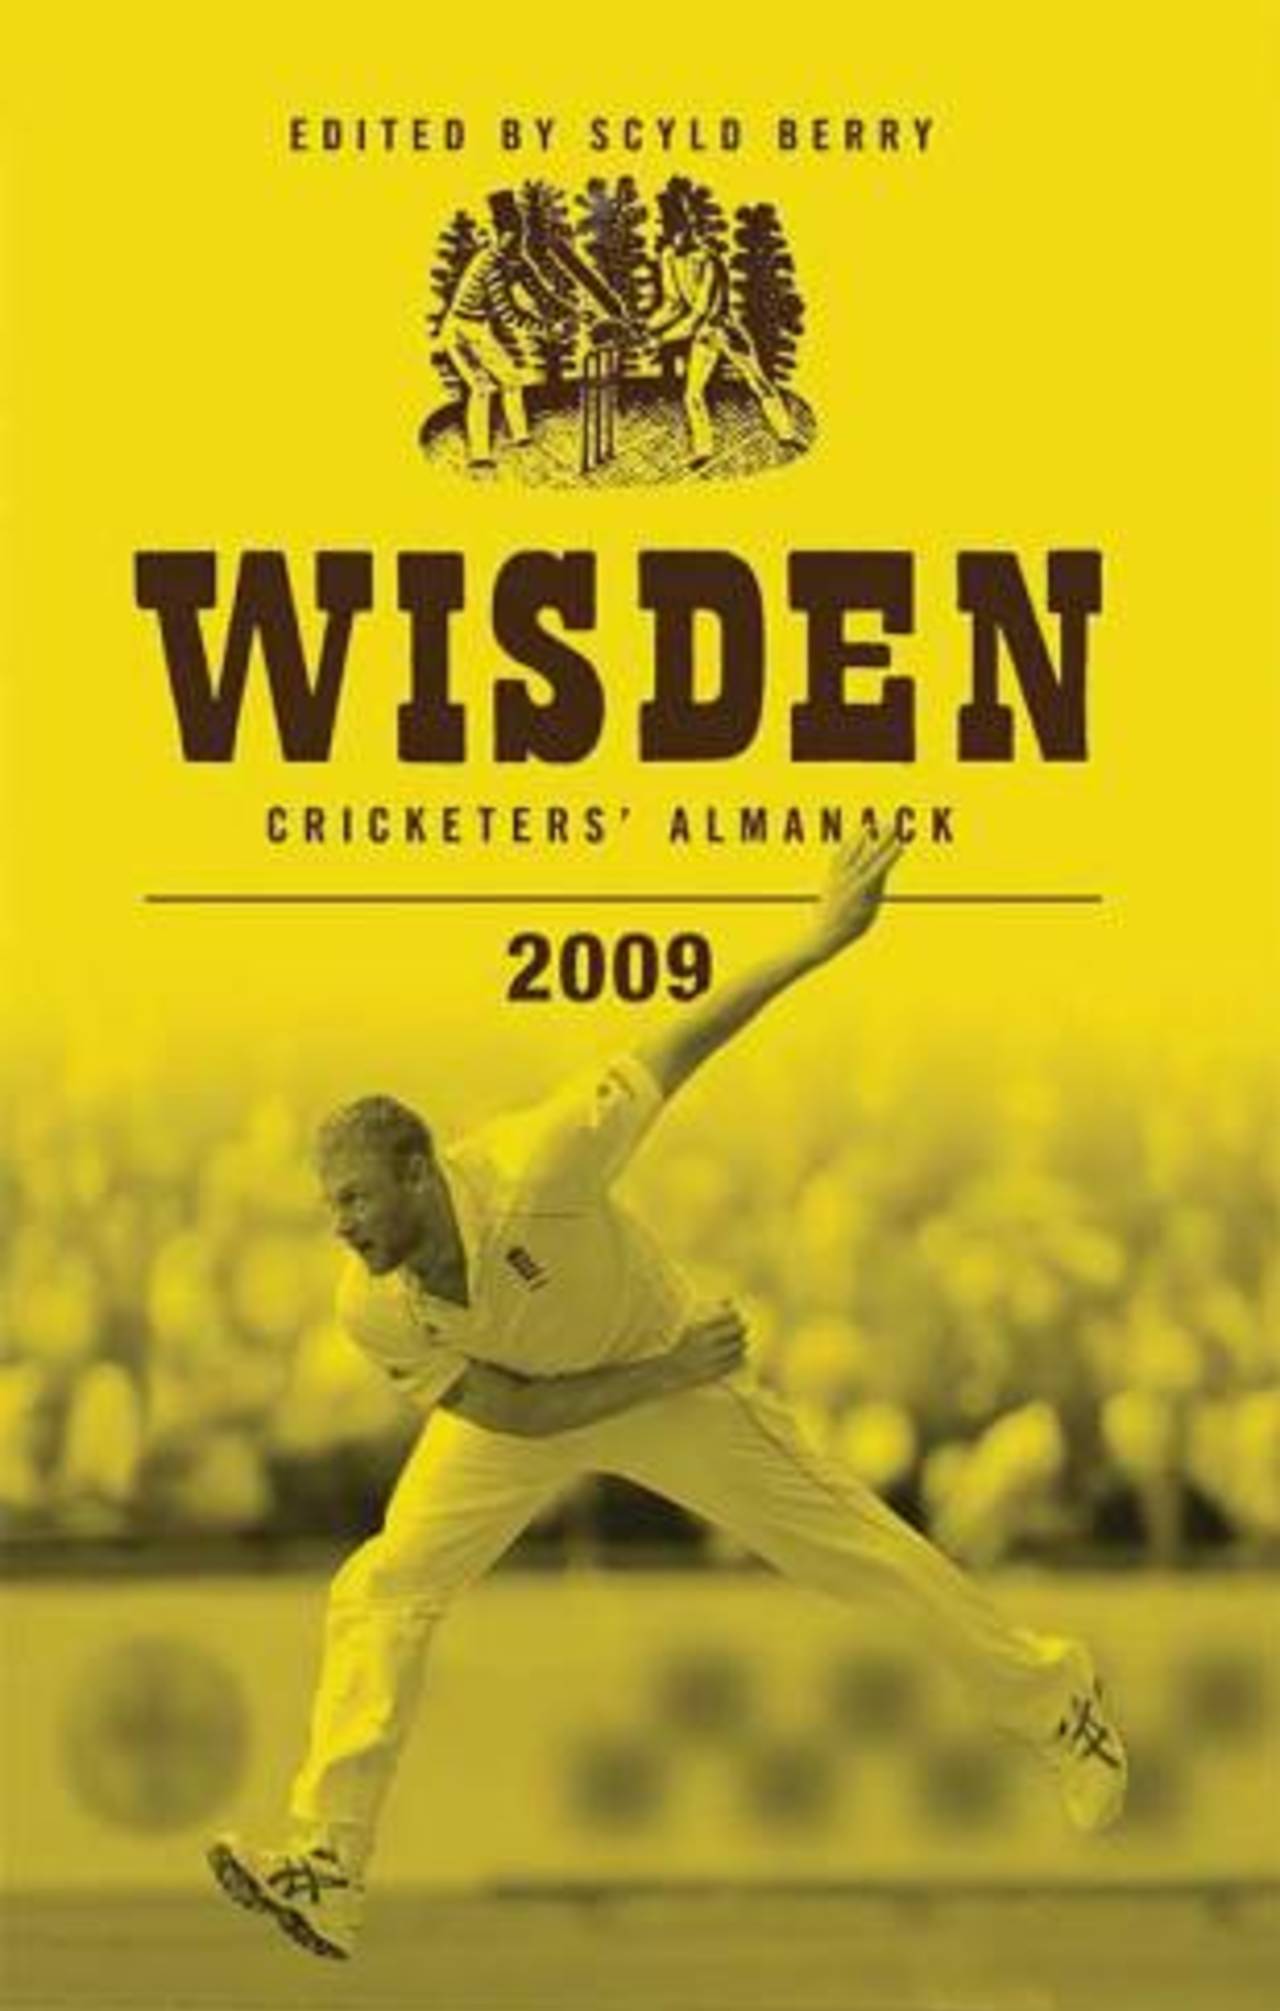 The yellow cover of the <i>Wisden Cricketers' Almanack</i> is one of the most memorable and well known emblems of the game&nbsp;&nbsp;&bull;&nbsp;&nbsp;Wisden